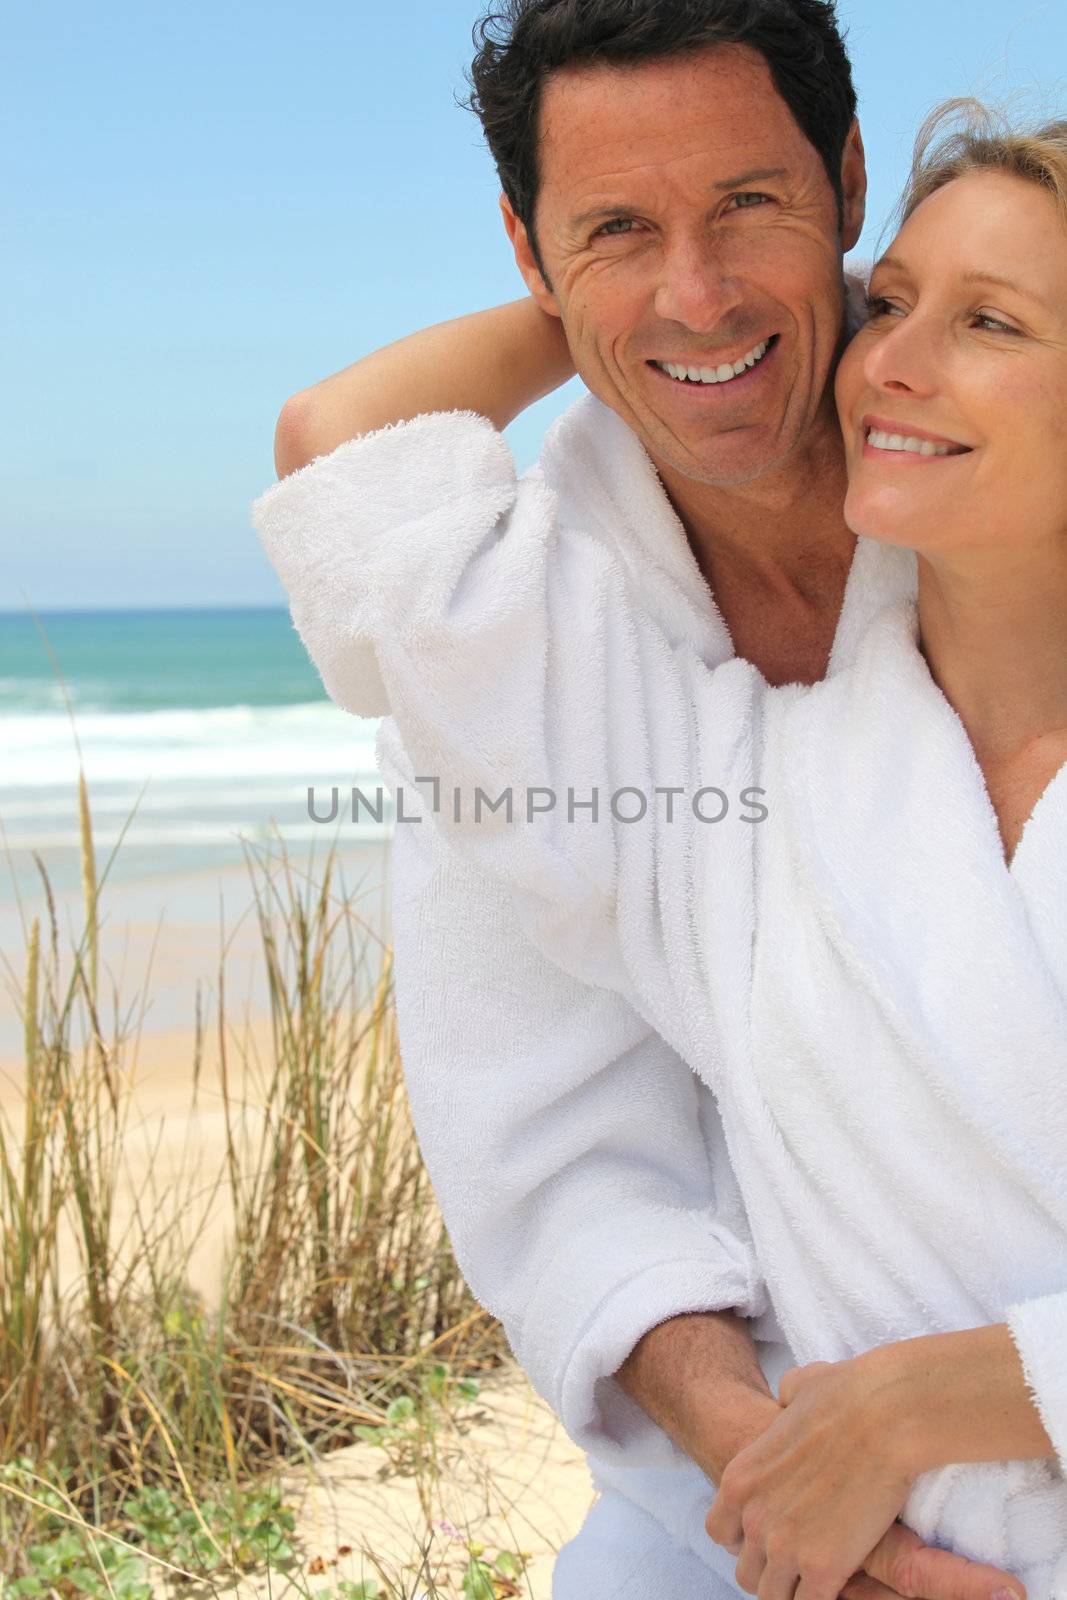 Couple on a romantic getaway by phovoir